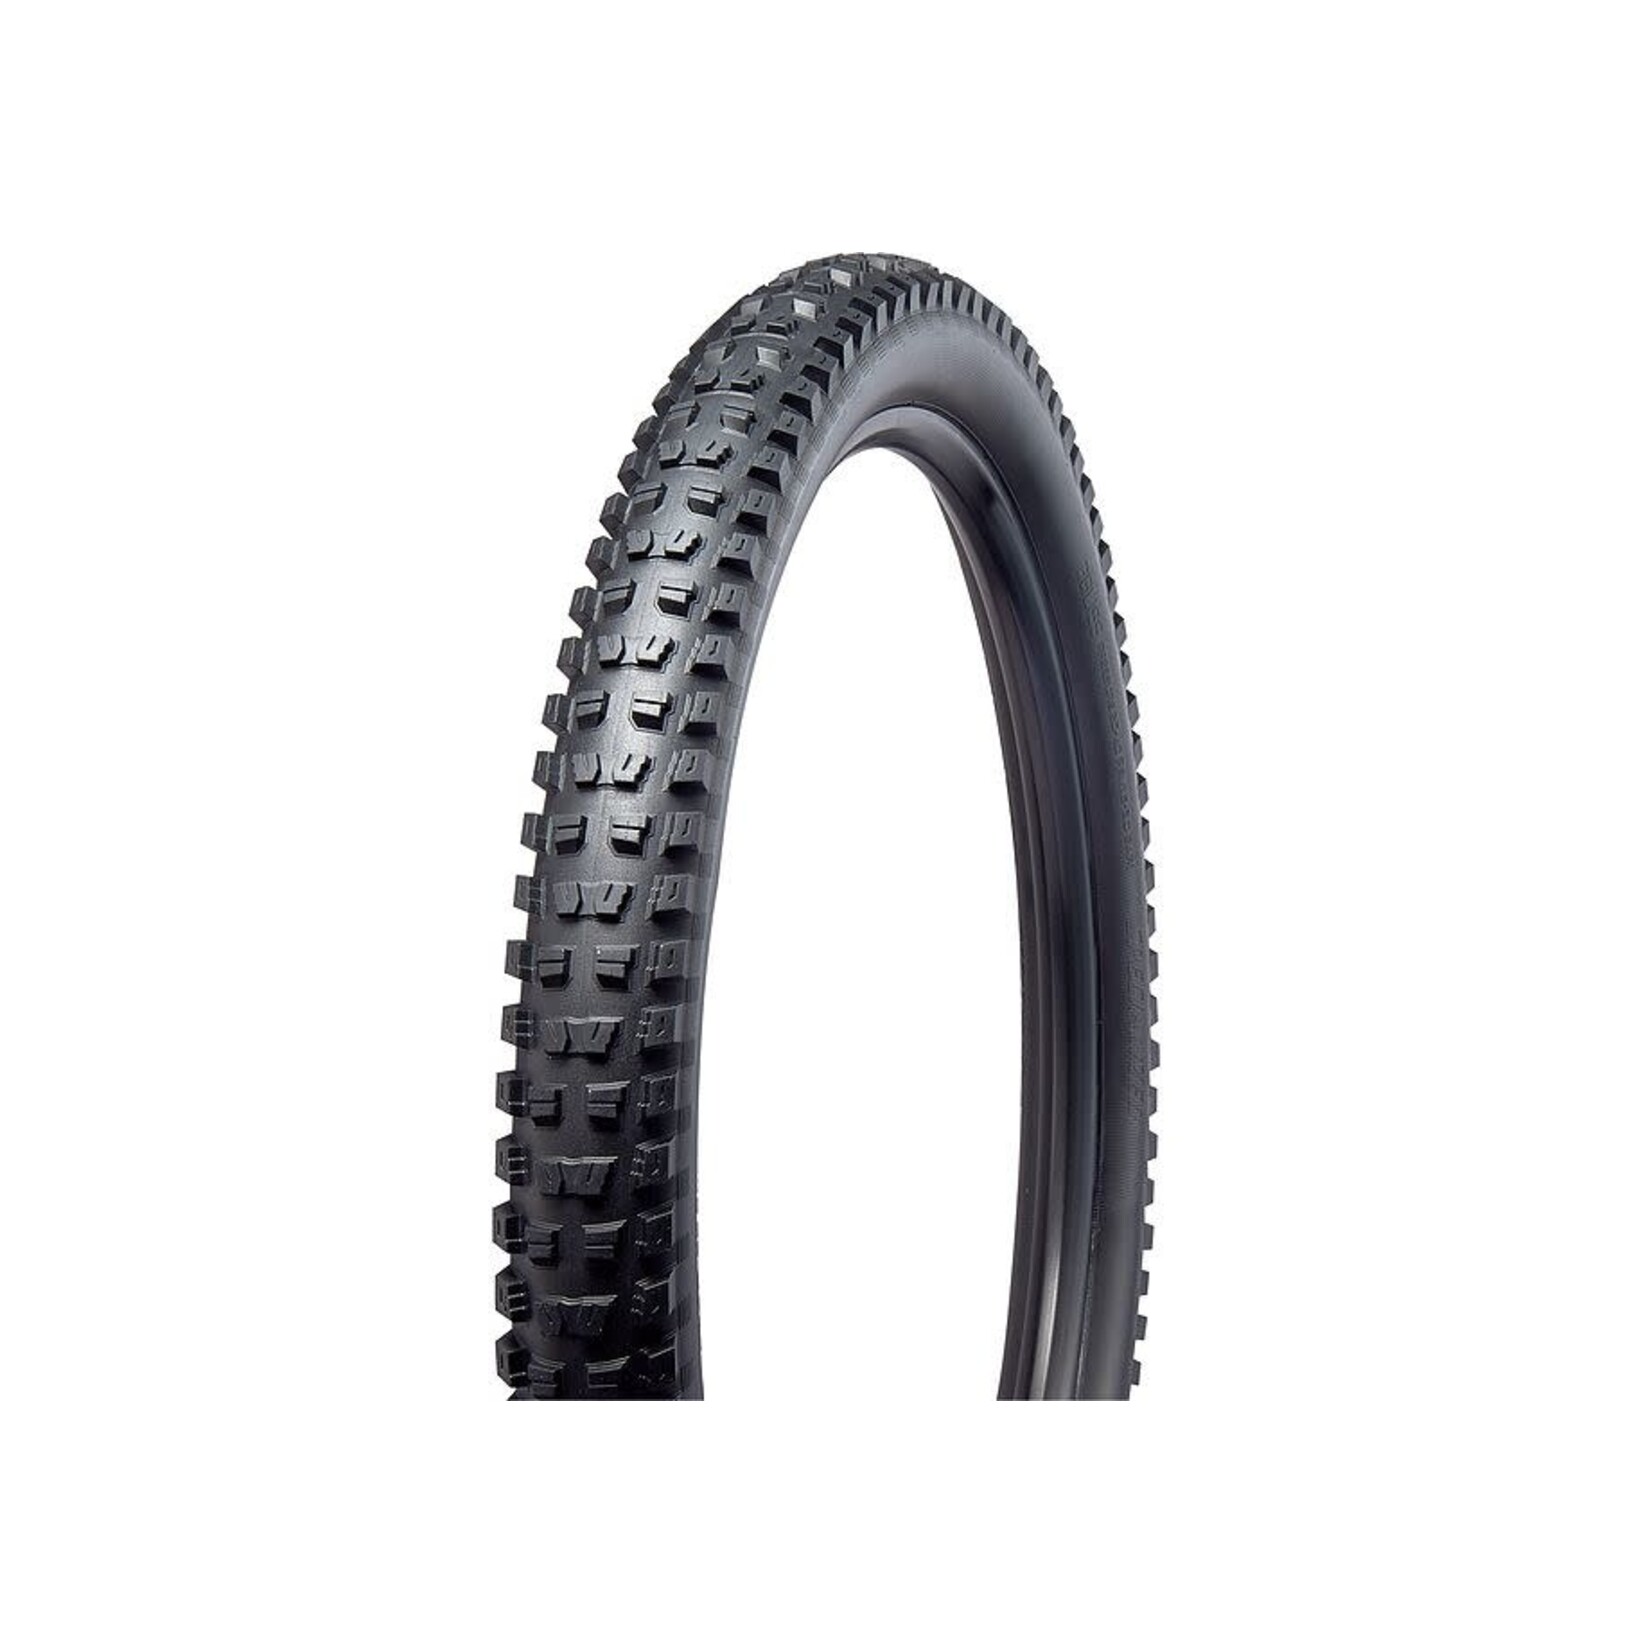 Specialized BUTCHER GRID TRAIL 2BR T7 TIRE 29X2.6